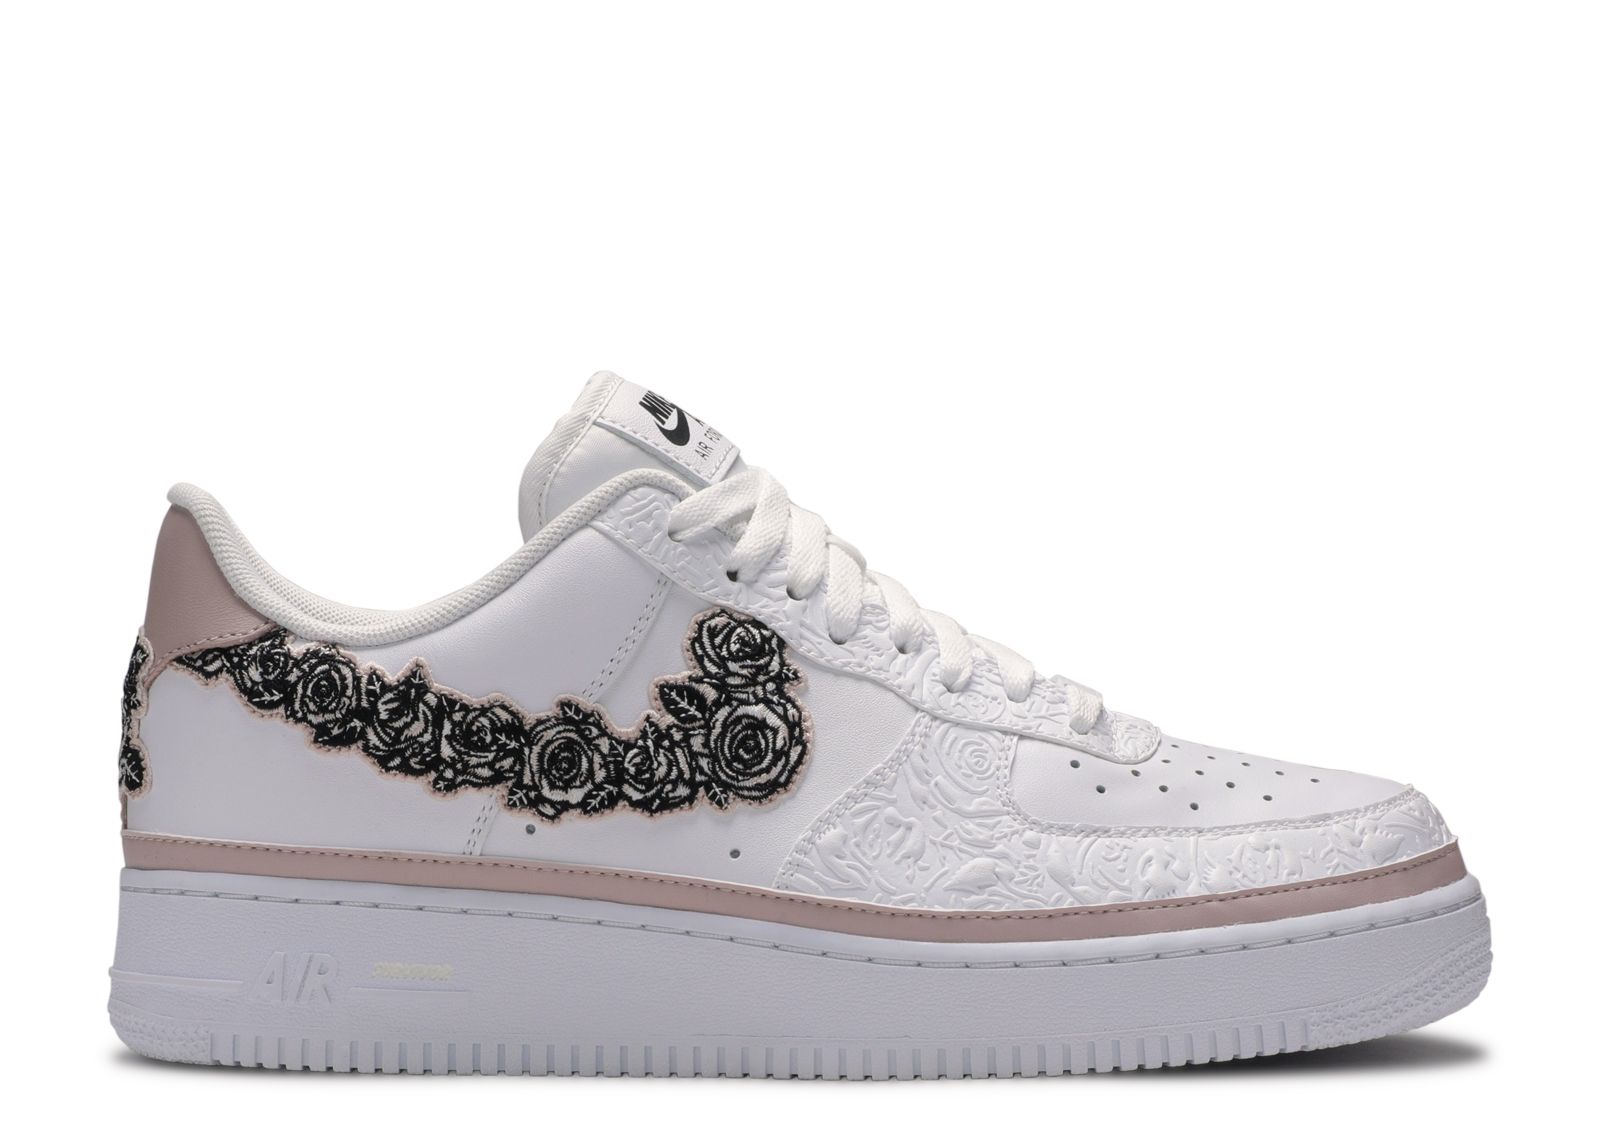 Grounds squeeze Foresee Air Force 1 '07 LV8 'Doernbecher' 2019 - Nike - CV2591 100 - white/stone  mauve/black | Flight Club